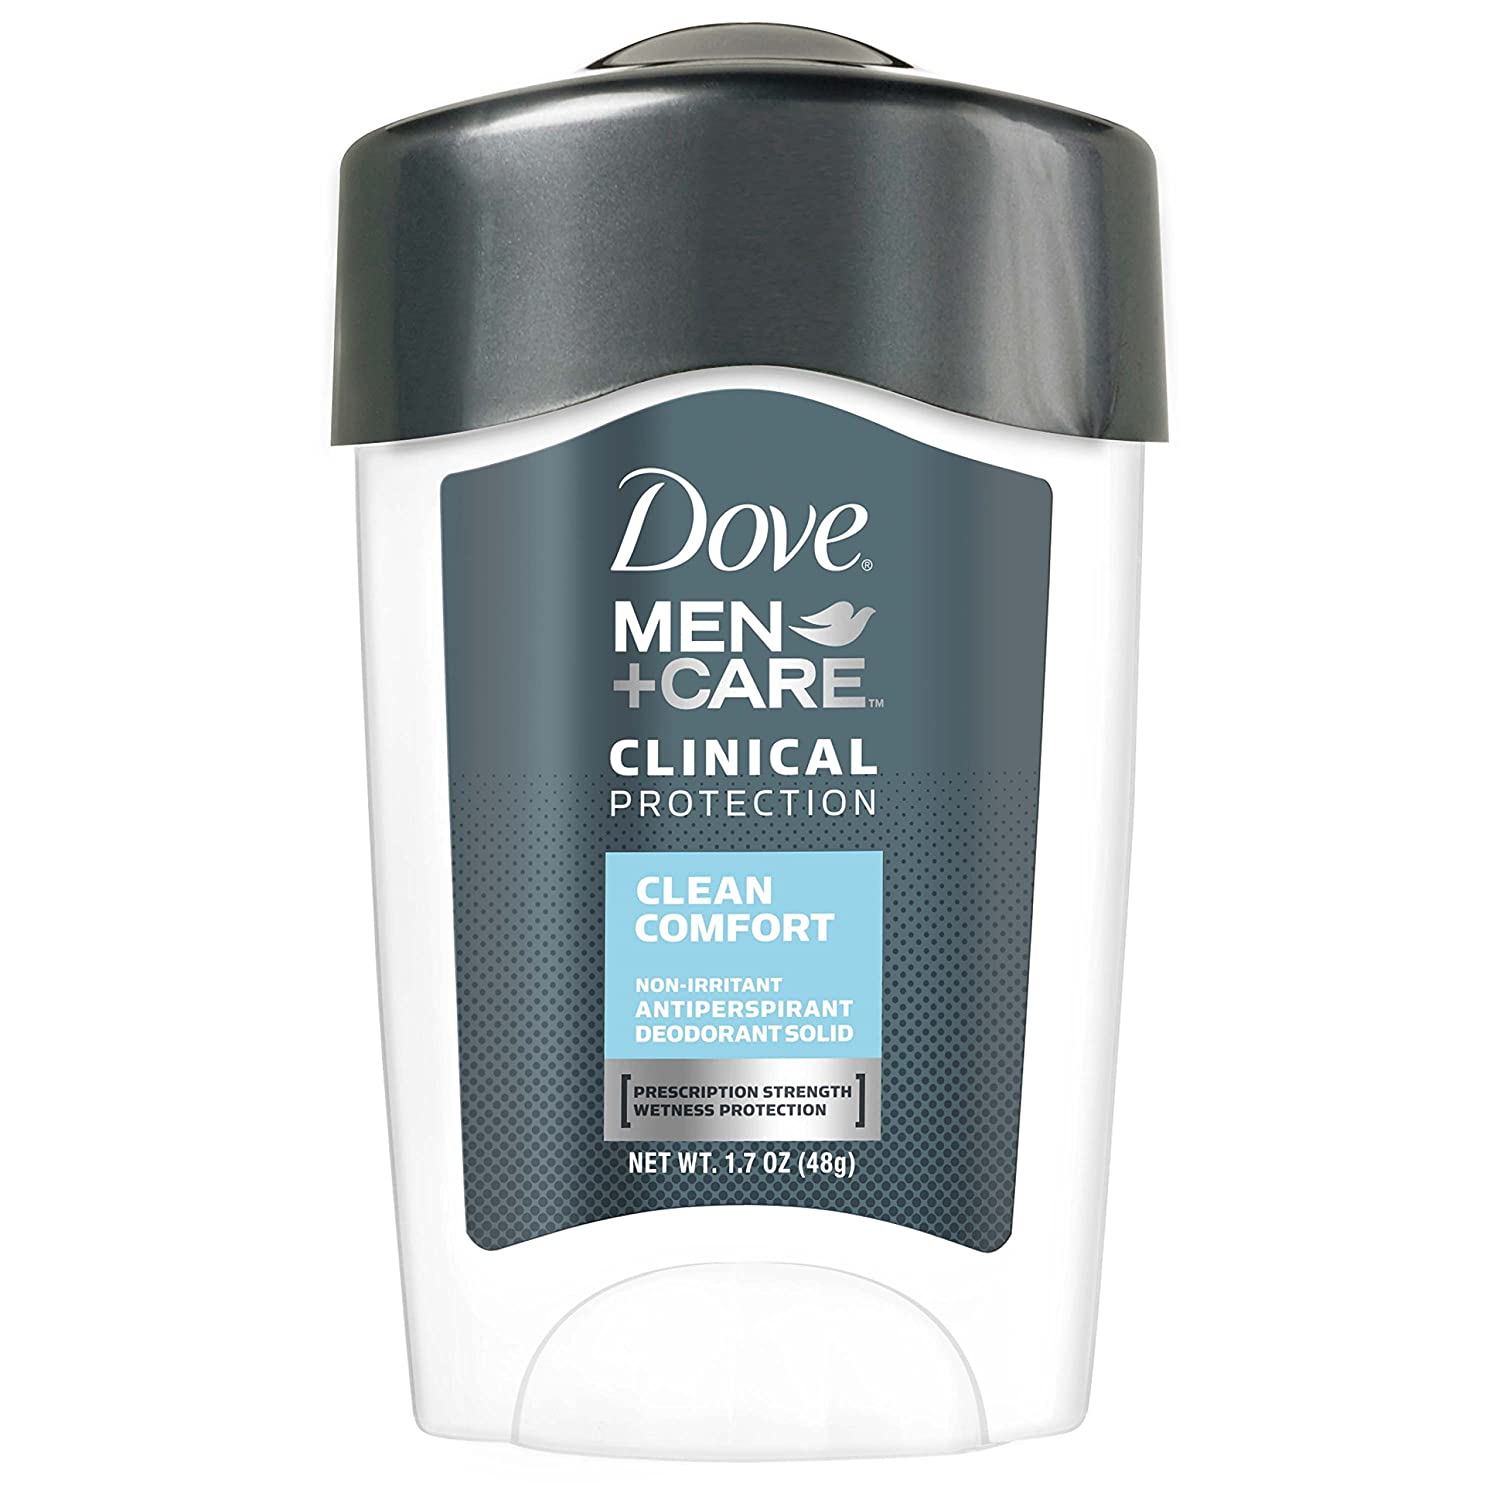 Dove Men+Care Clinical Protection Deodorant